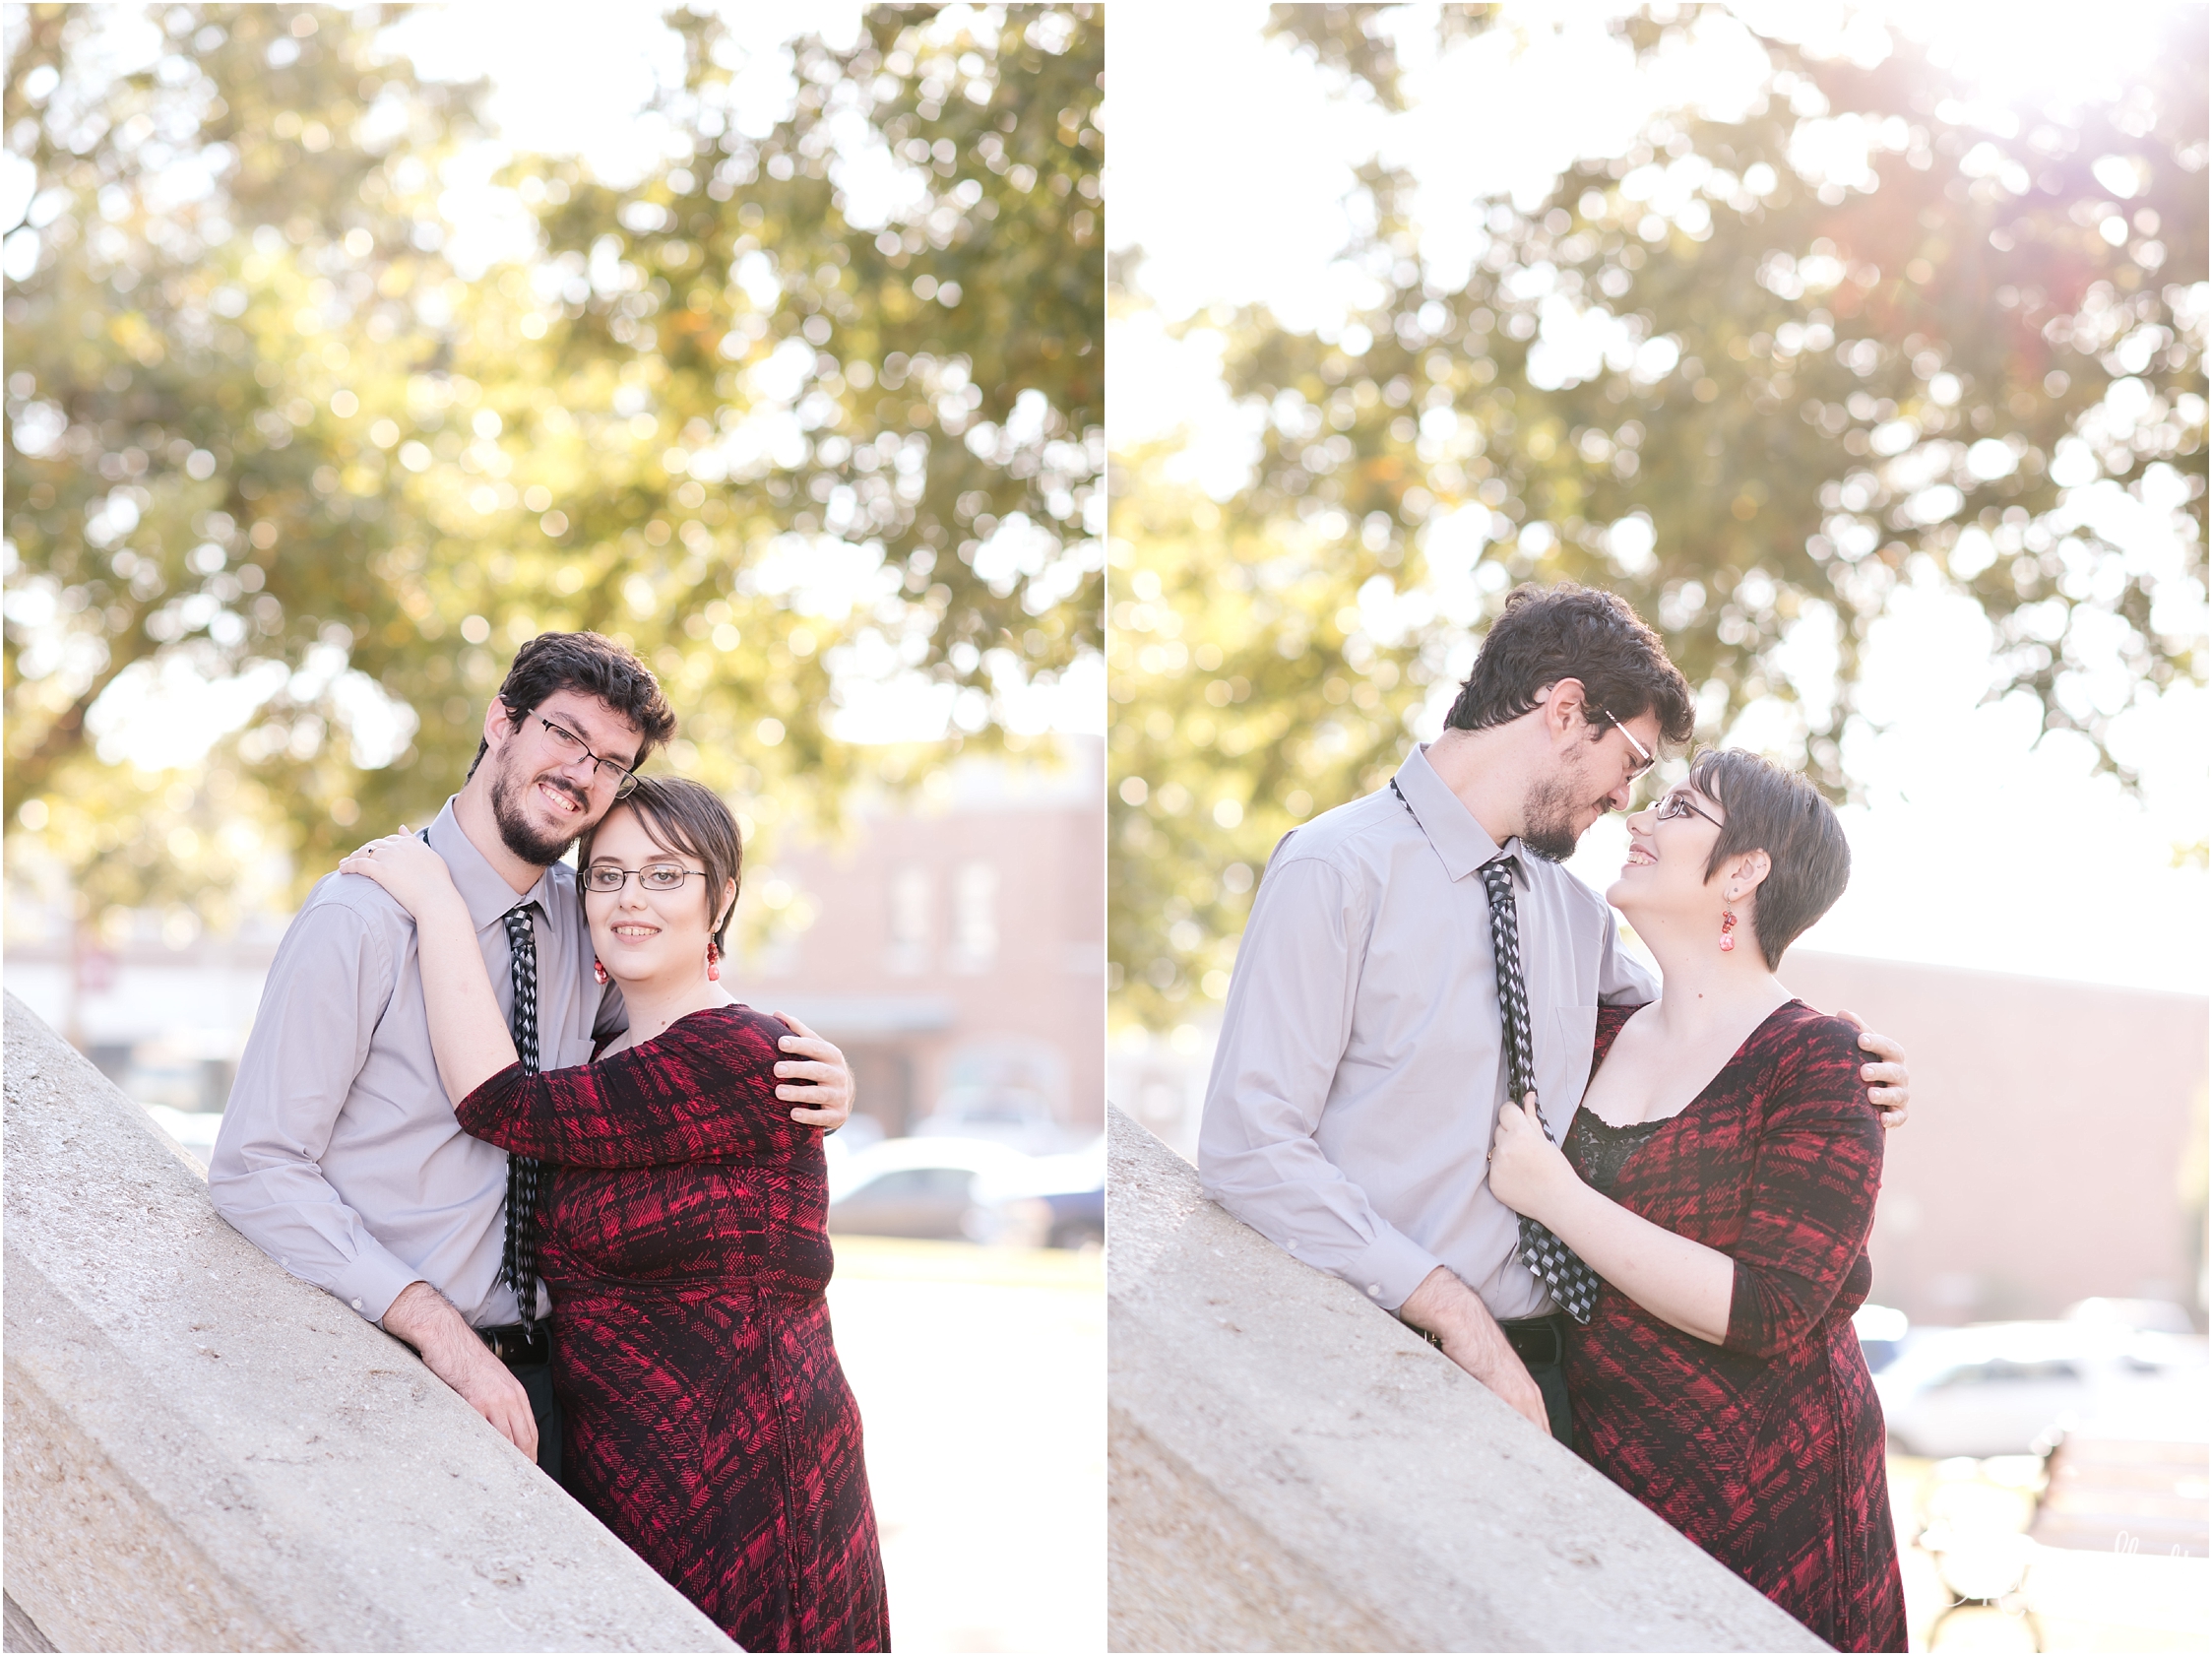 kate & andrew, love, shoot, engagement shoot, MaggShots Photography, MaggShots, Professional Photography, Professional Photographer, Denton Square, Trees